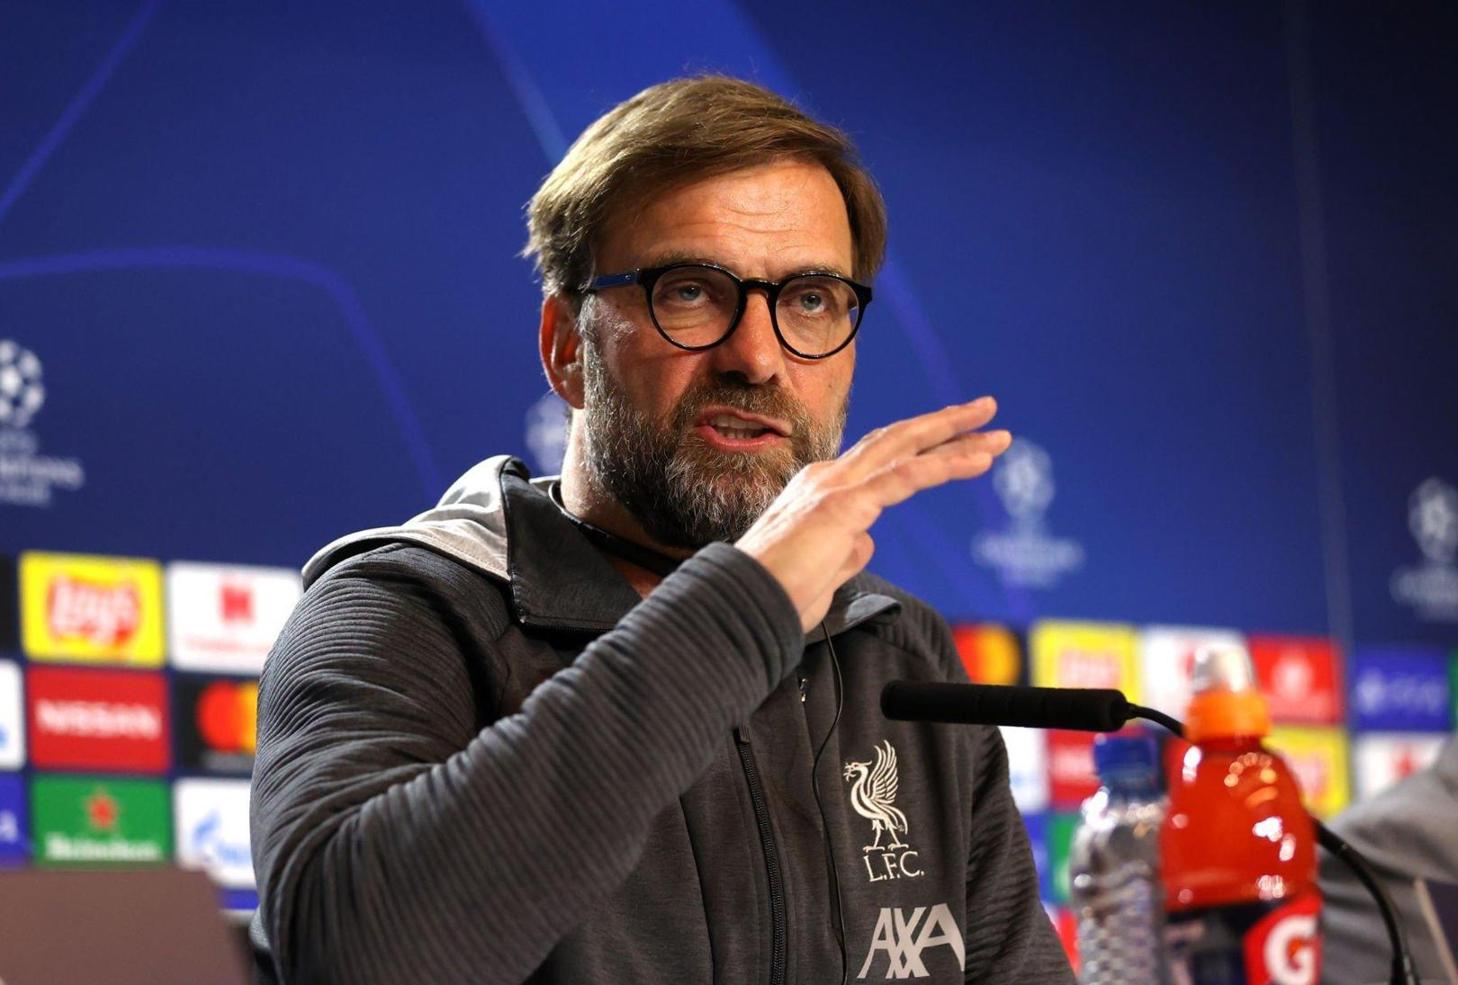 UCL: Massive blow, everybody was ready to switch TVs off – Klopp on Man City elimination